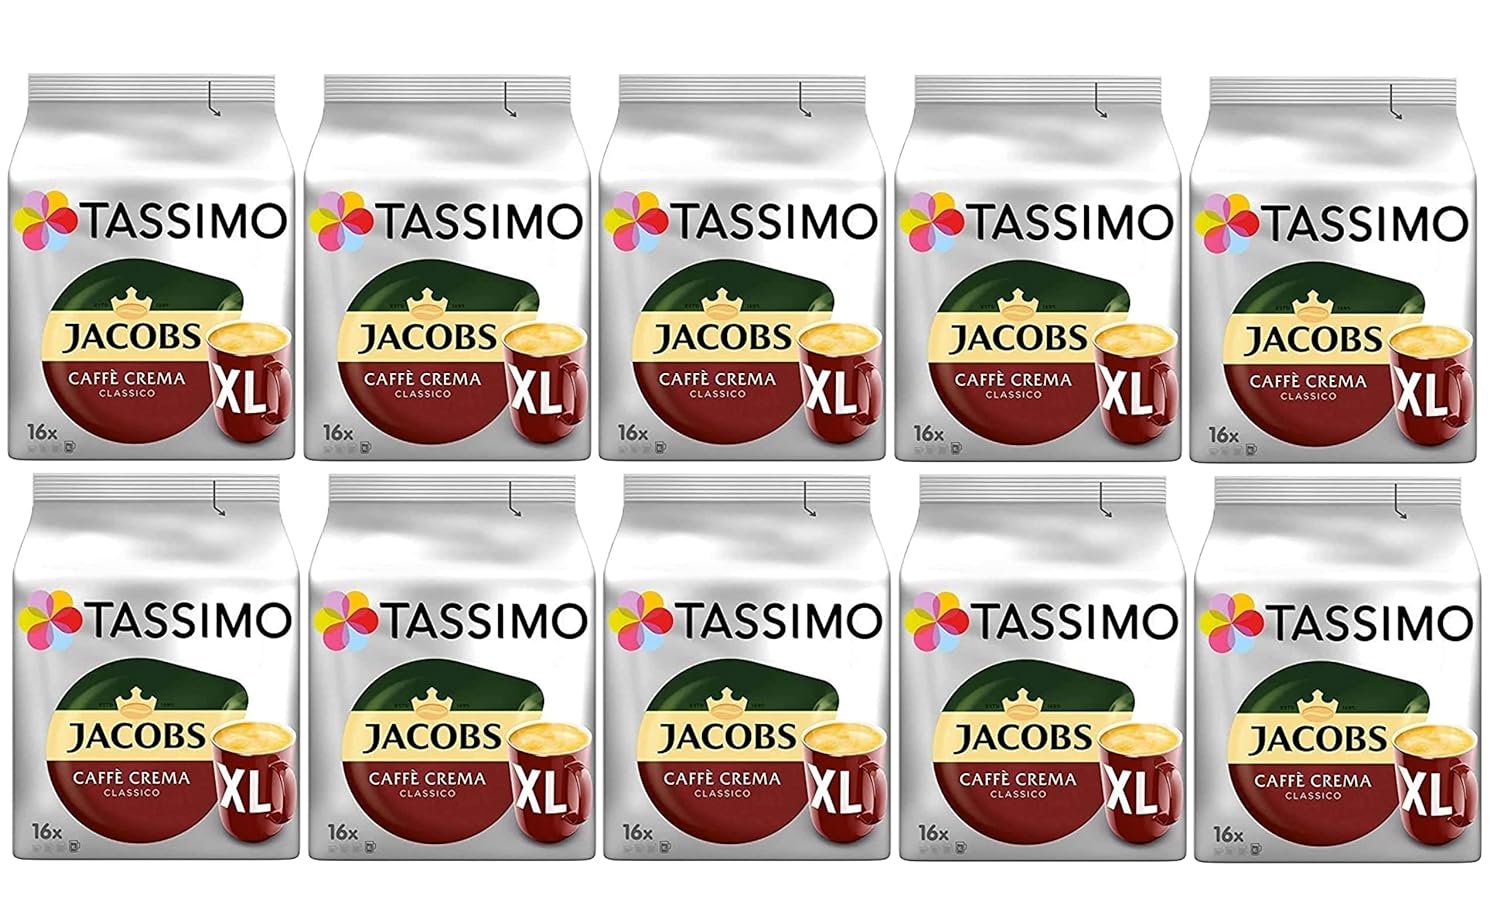 Tassimo Jacobs Caffe Crema Classico X-Large (Pack of 10)